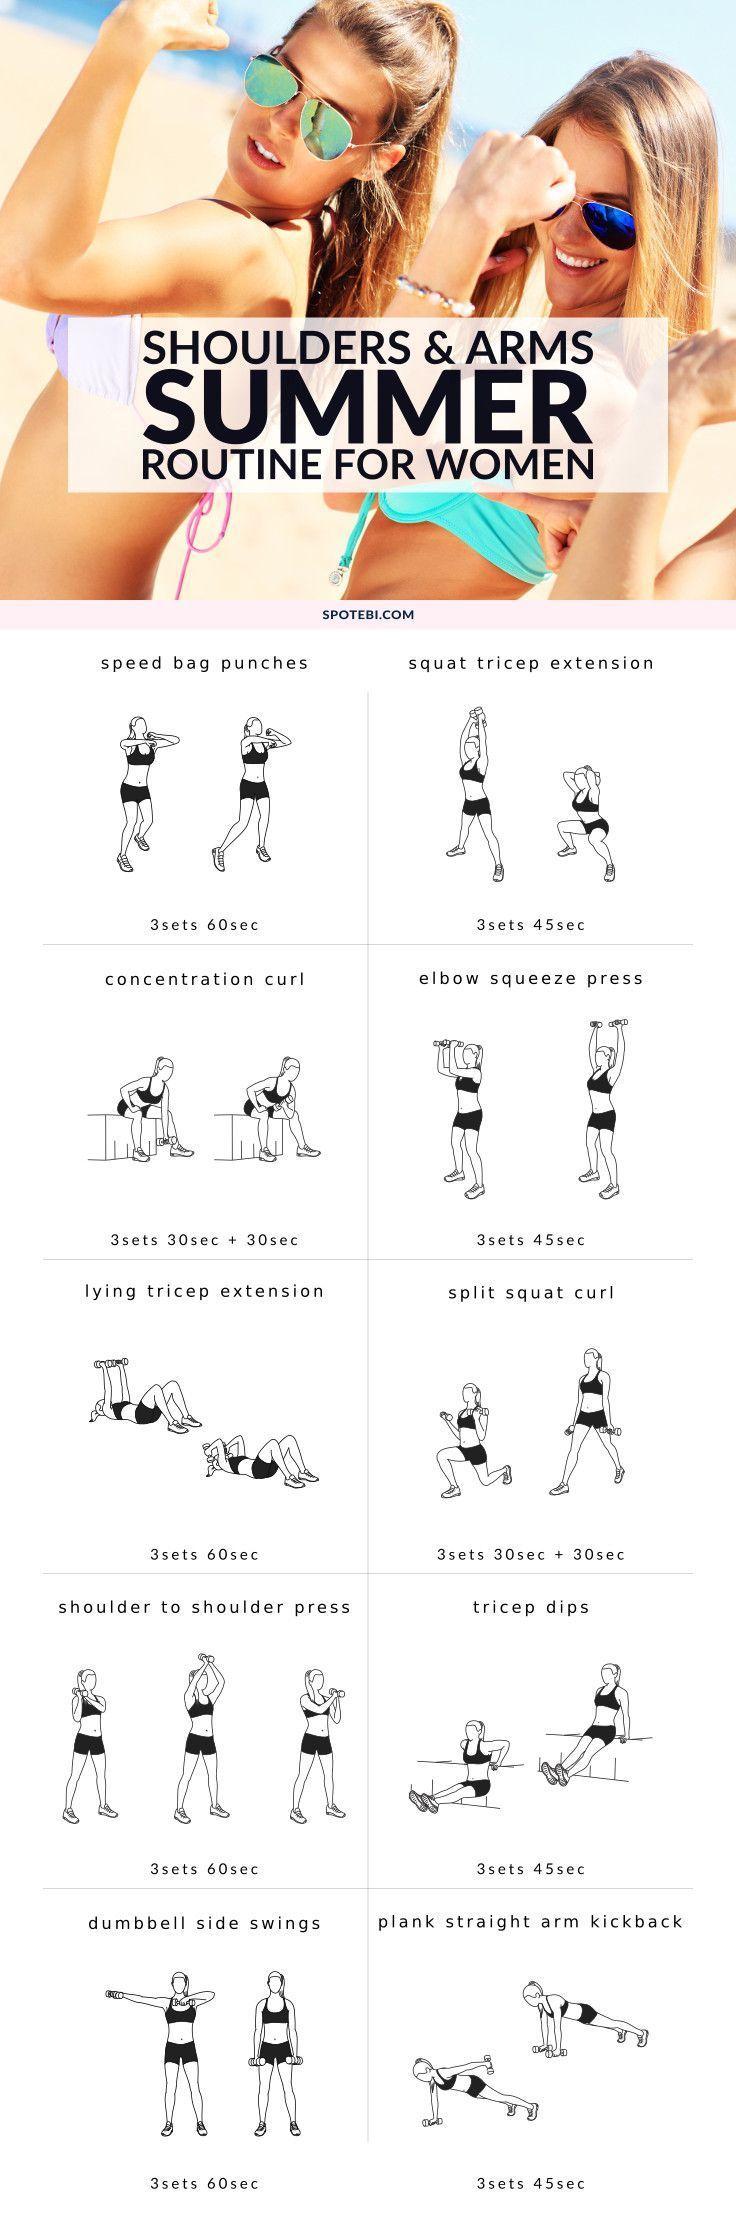 Wedding - Shoulders & Arms Workout For Women